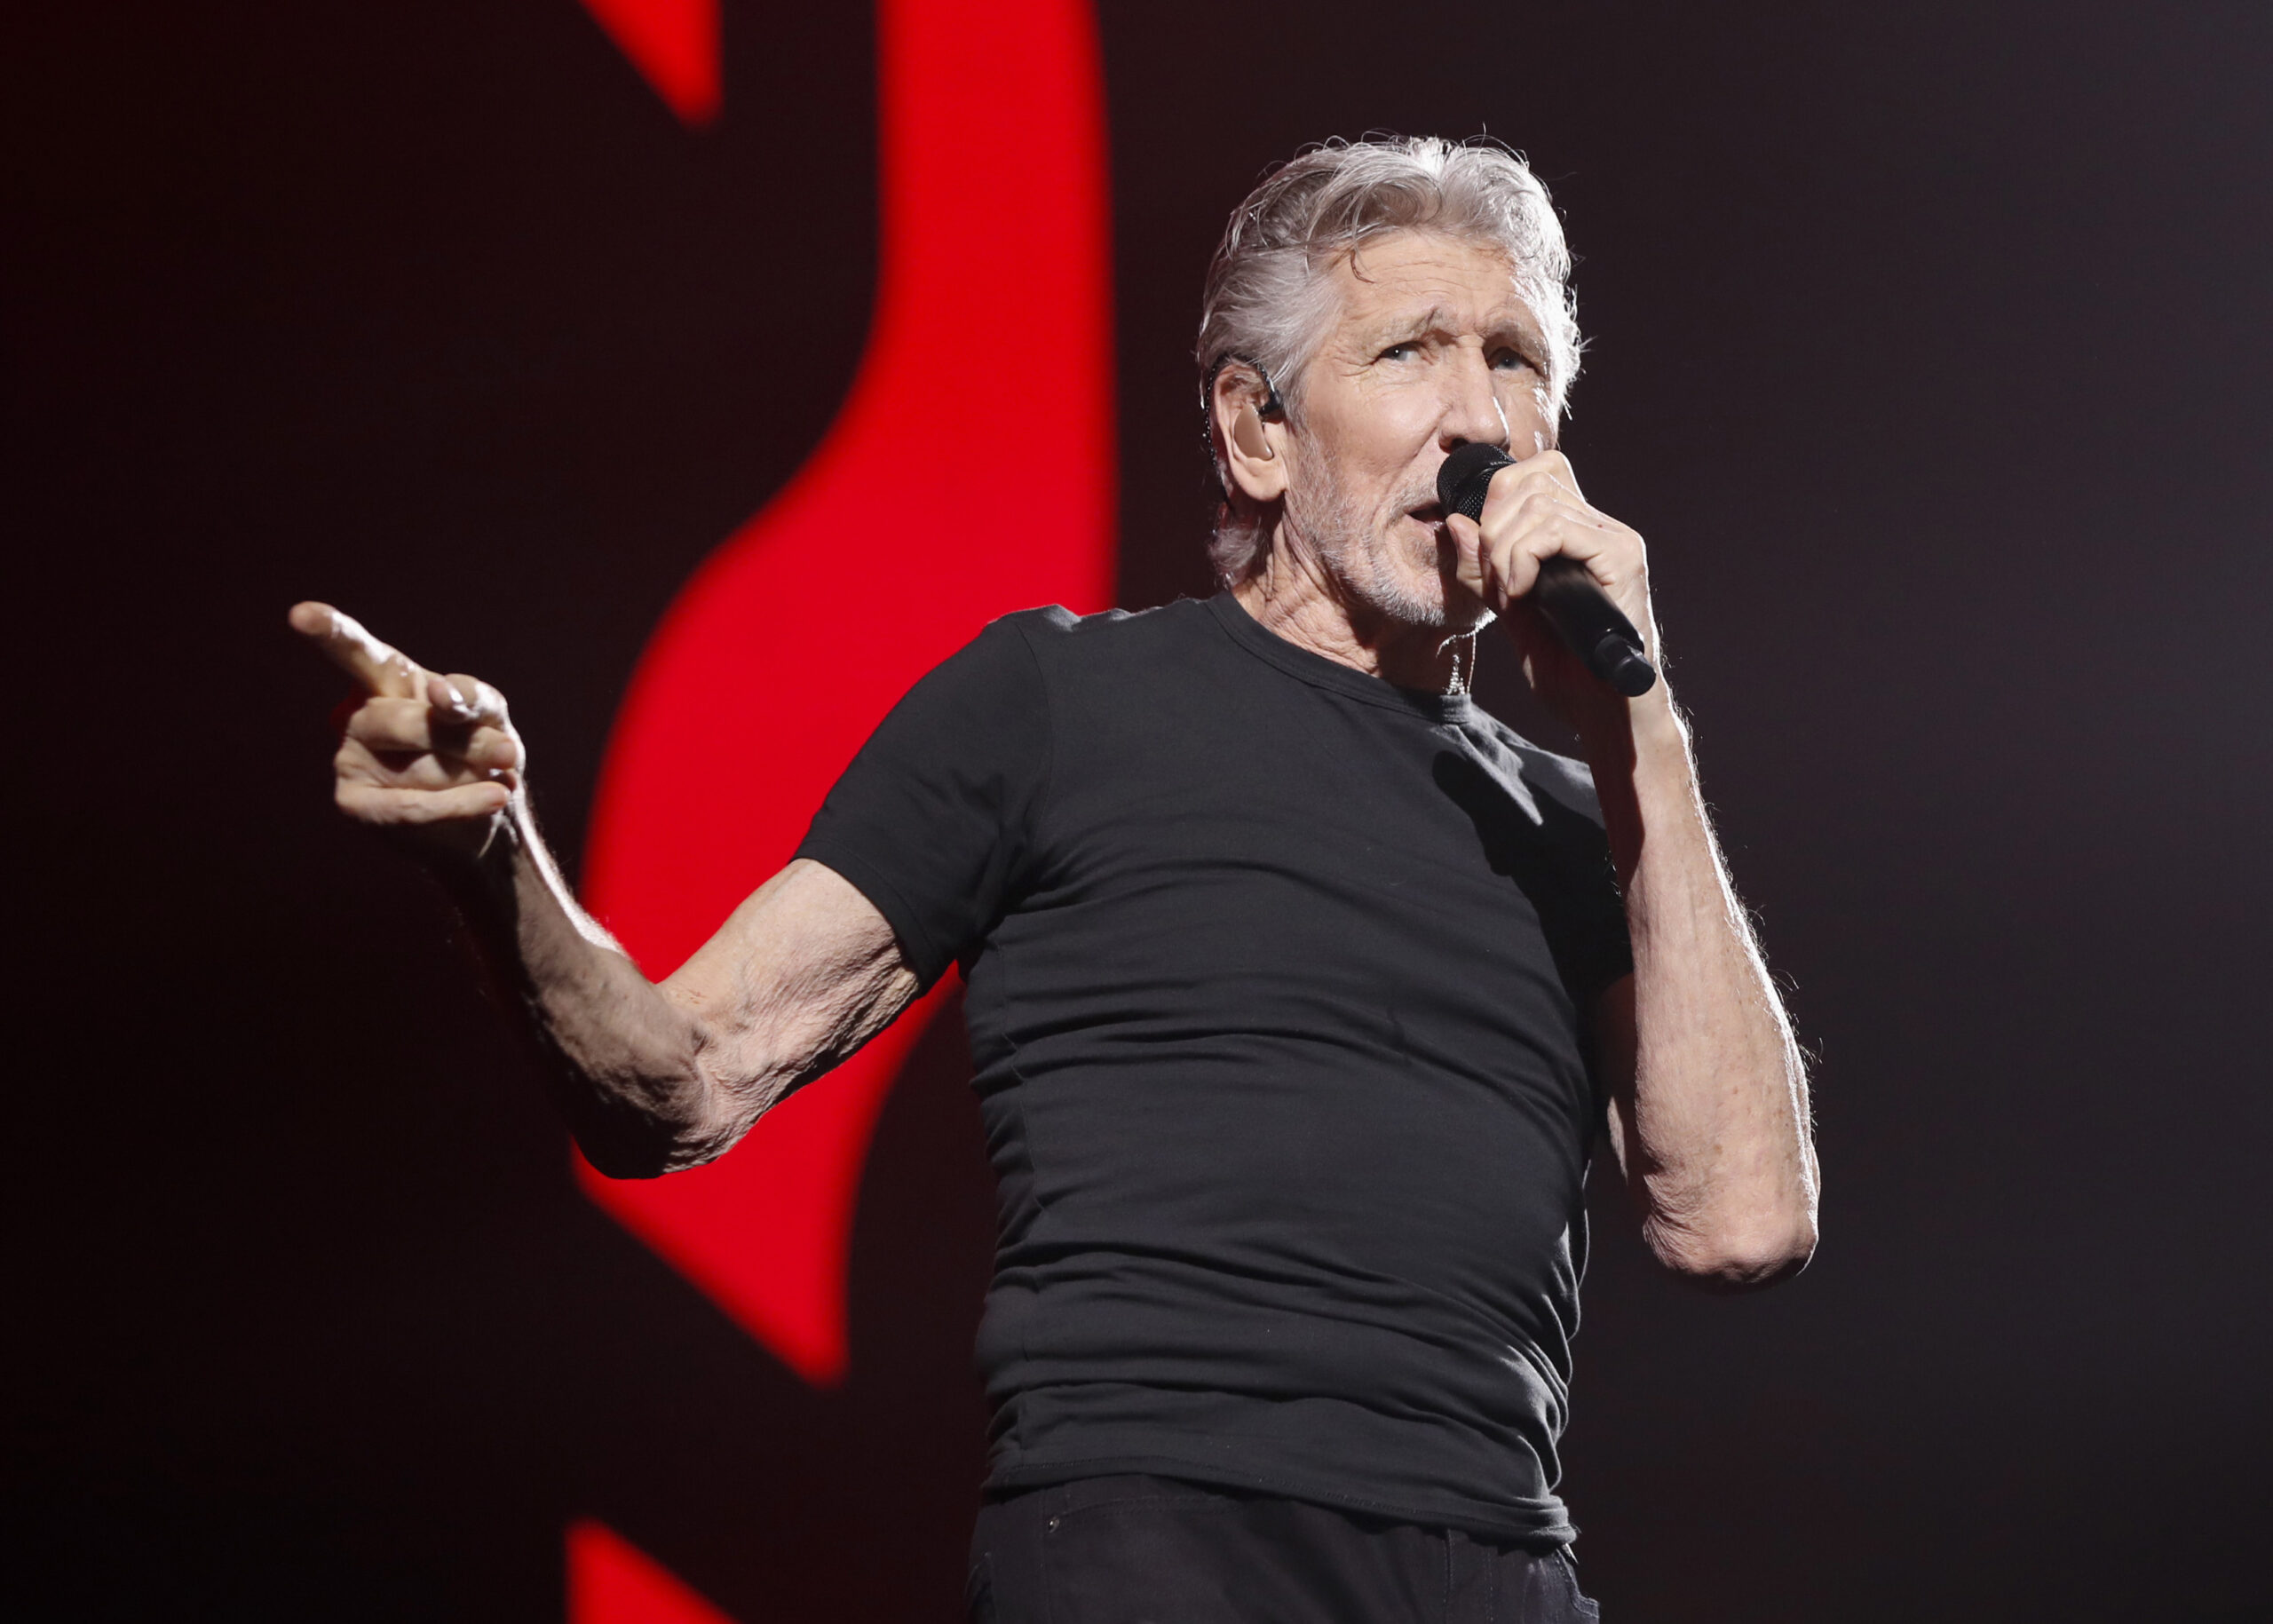 Ahead of SF Show, Pink Floyd’s Roger Waters Challenges Fans With Unpopular Stance on Ukraine